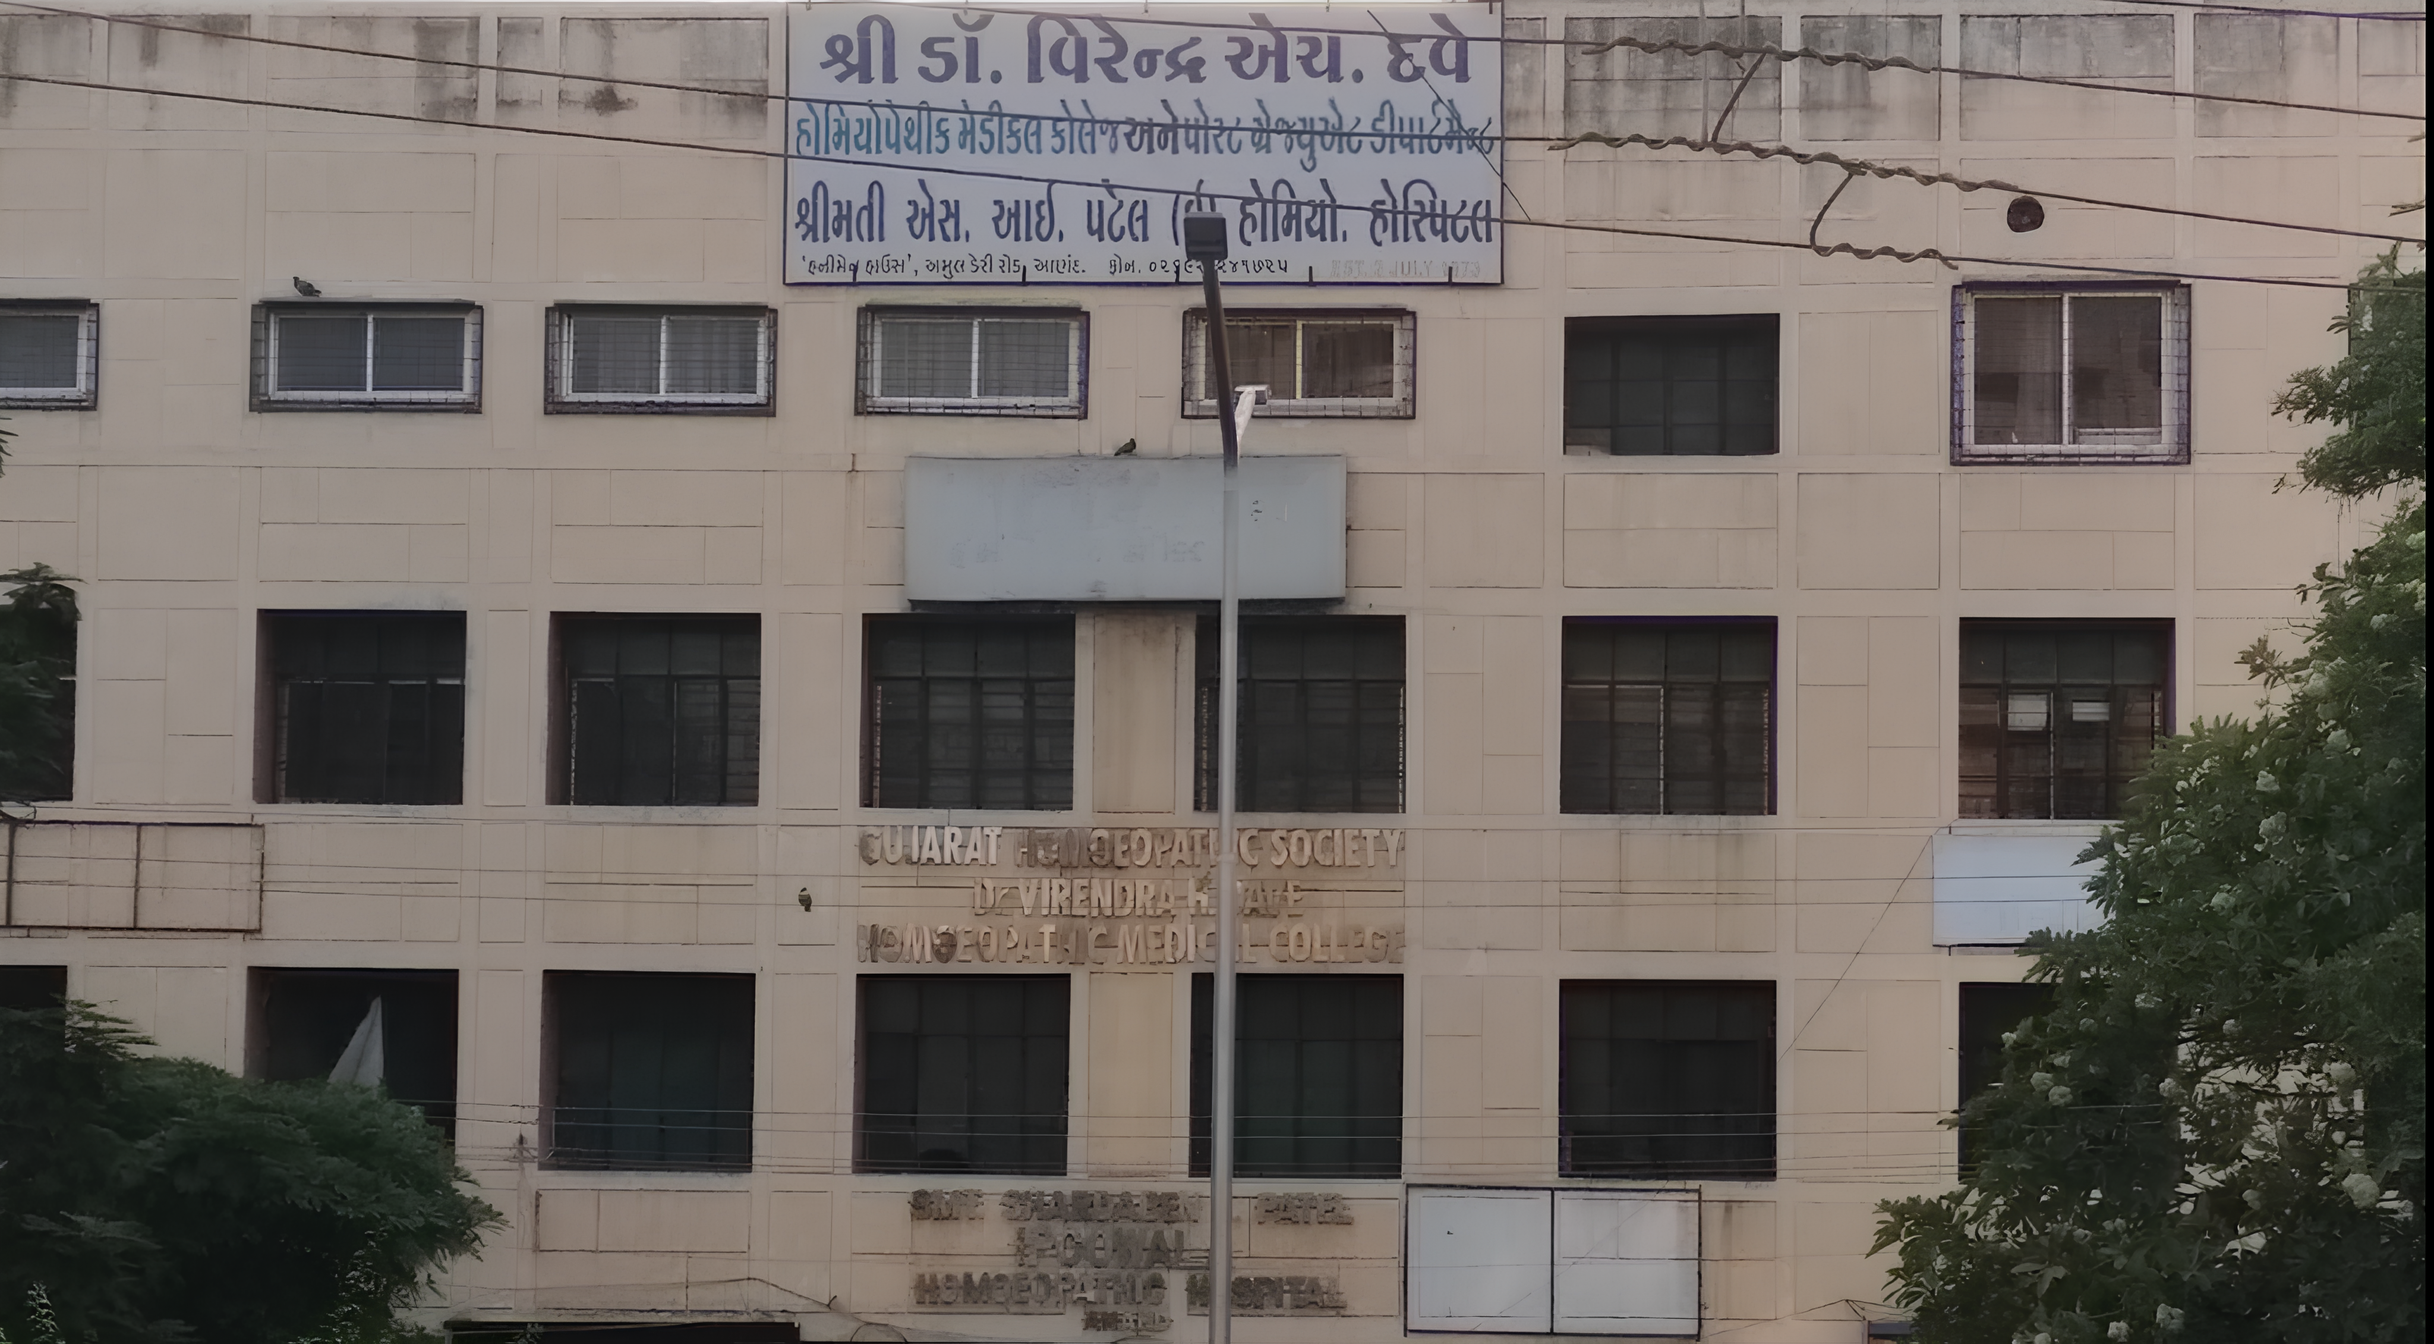 Dr VH Dave Homeopathic Medical College Anand Admission, Courses, Eligibility, Fees, Facilities